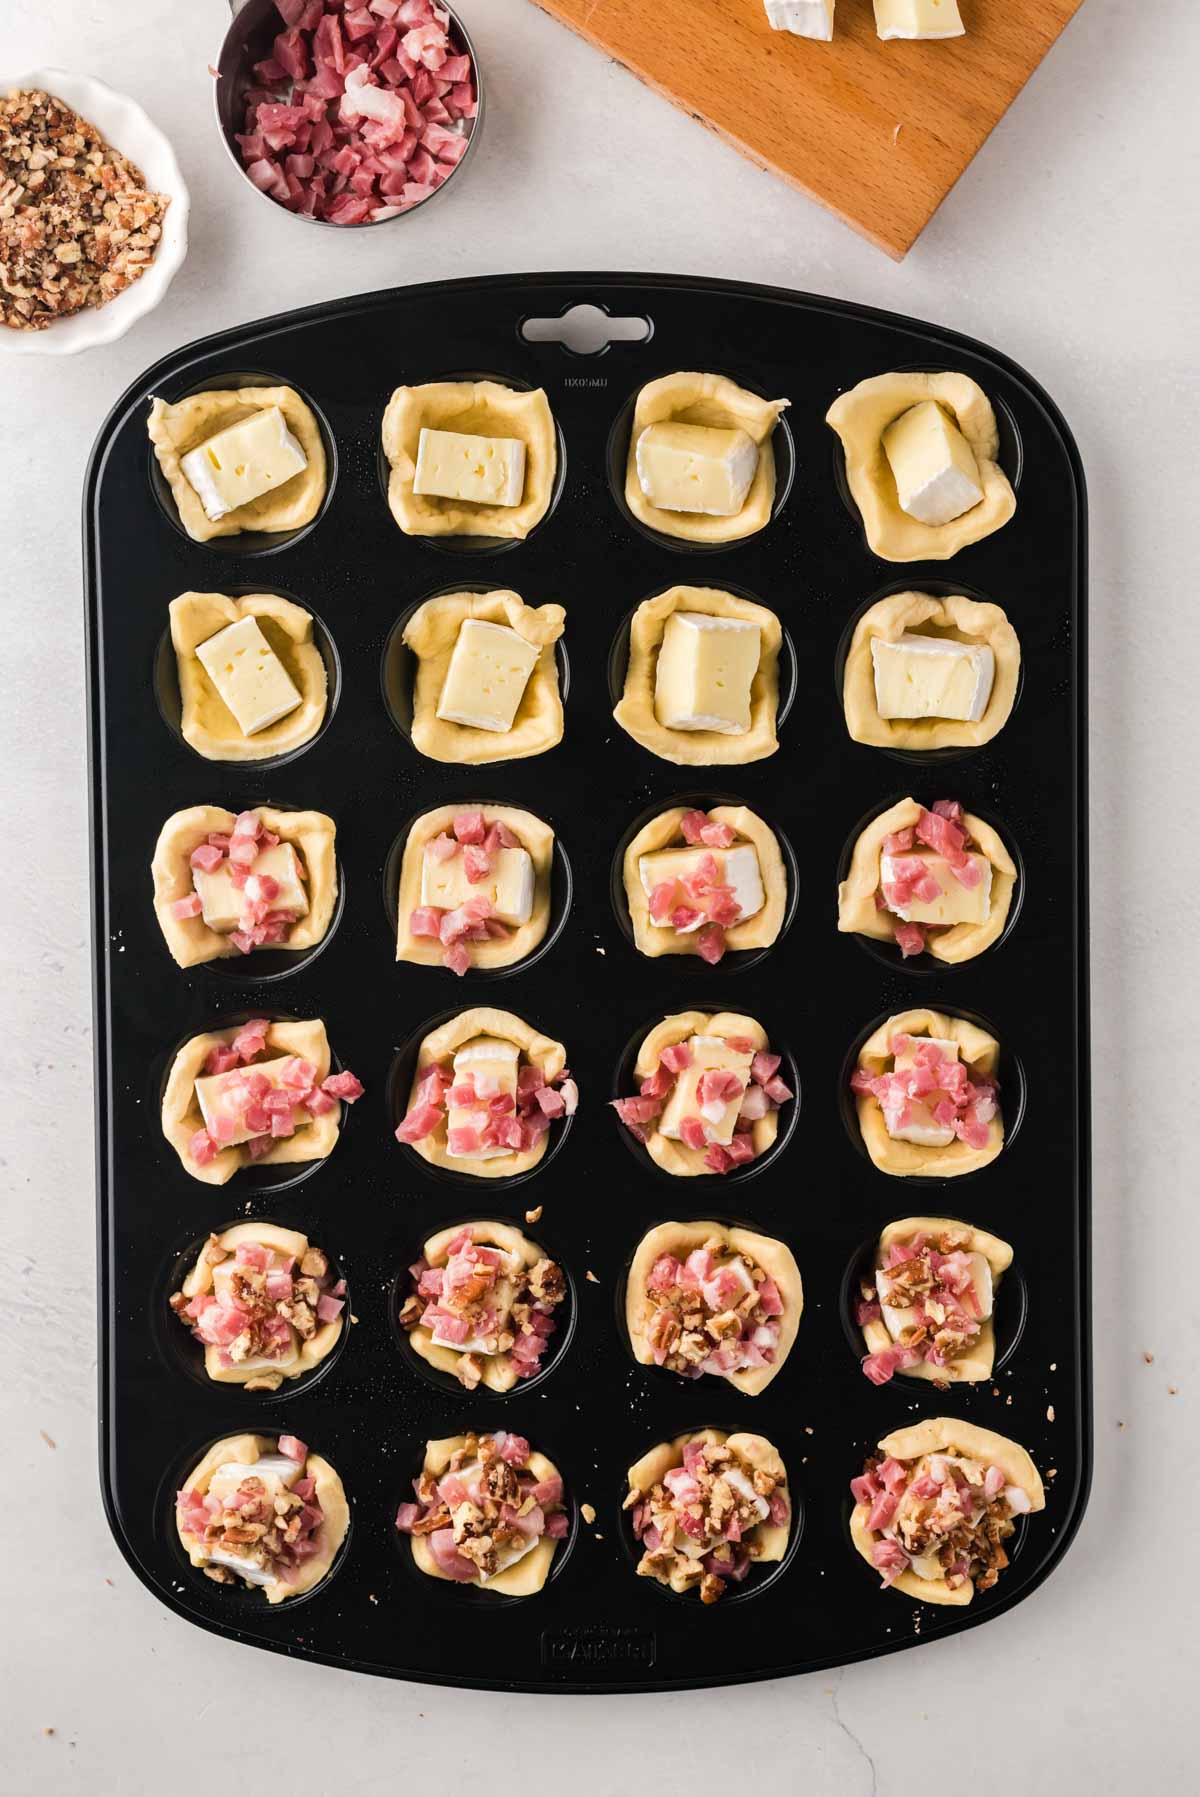 Brie and bacon in mini muffin tins